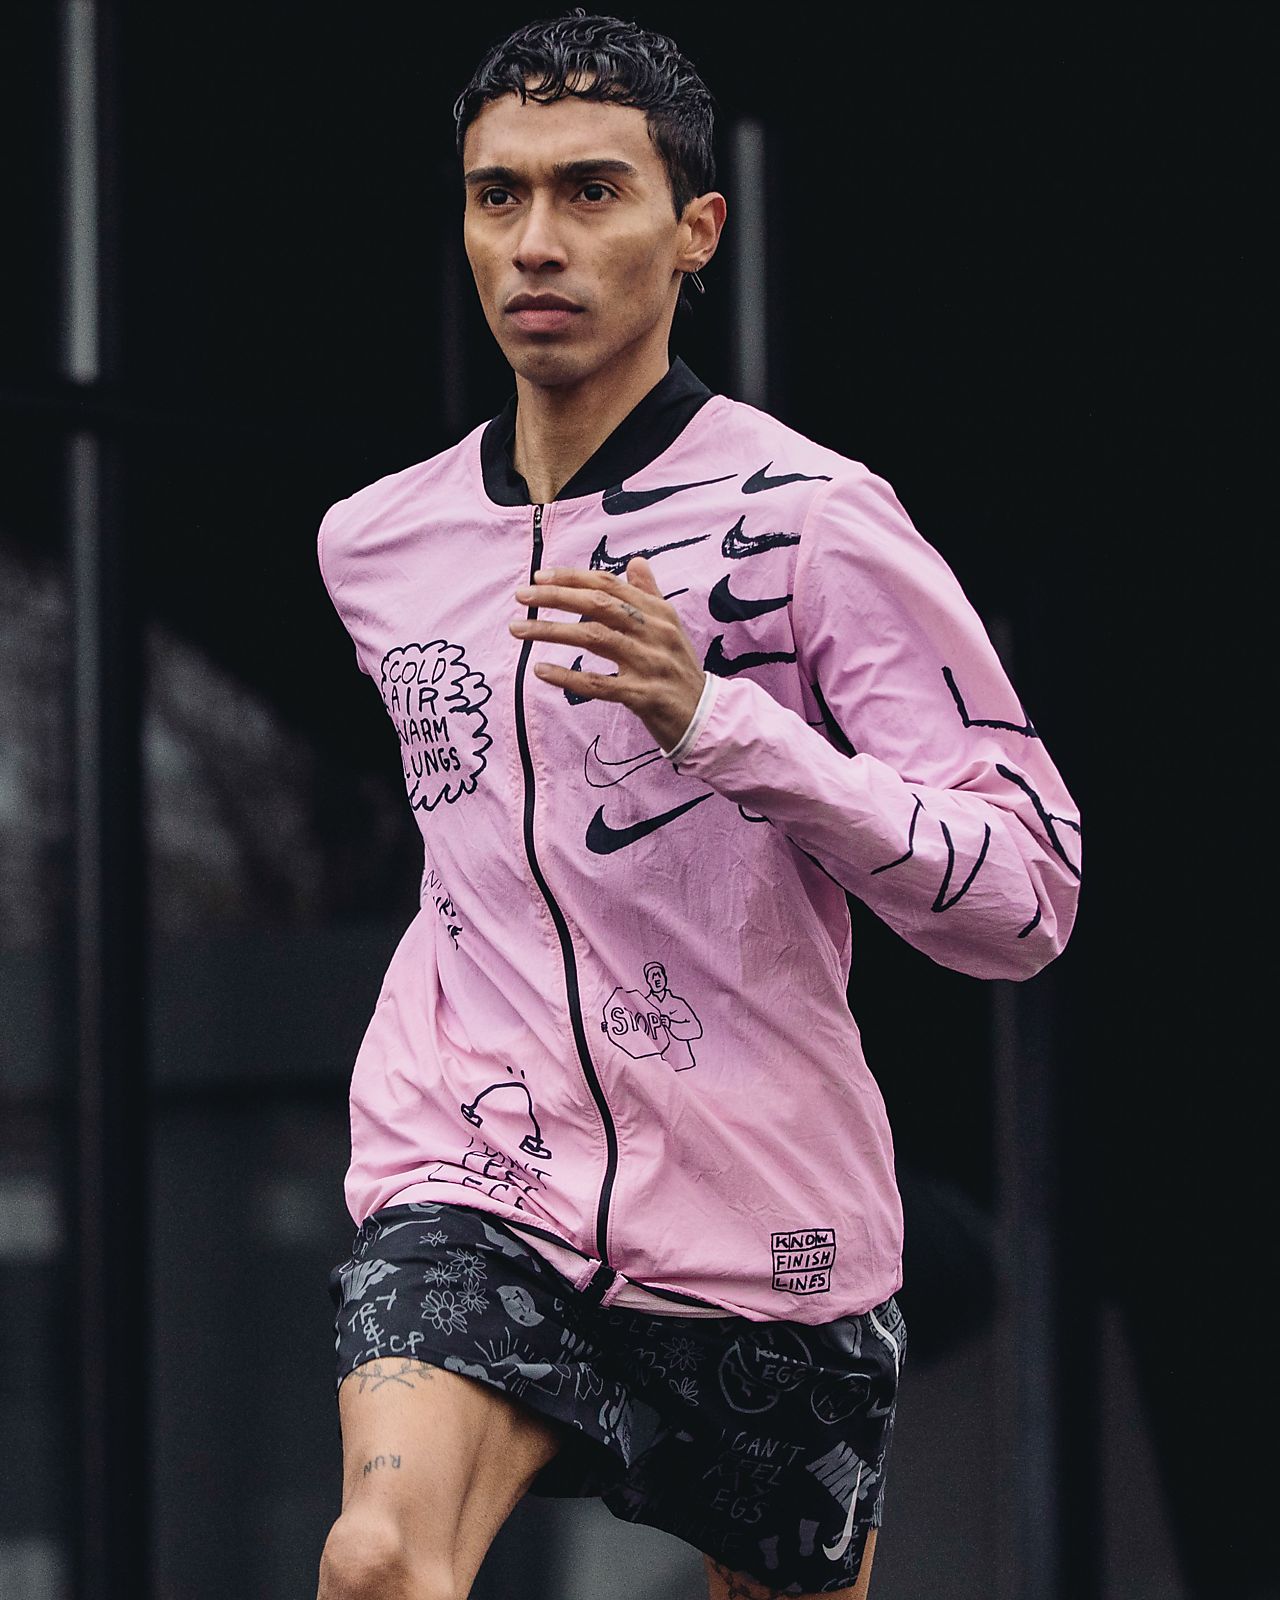 nike artist jacket graphic nathan bell